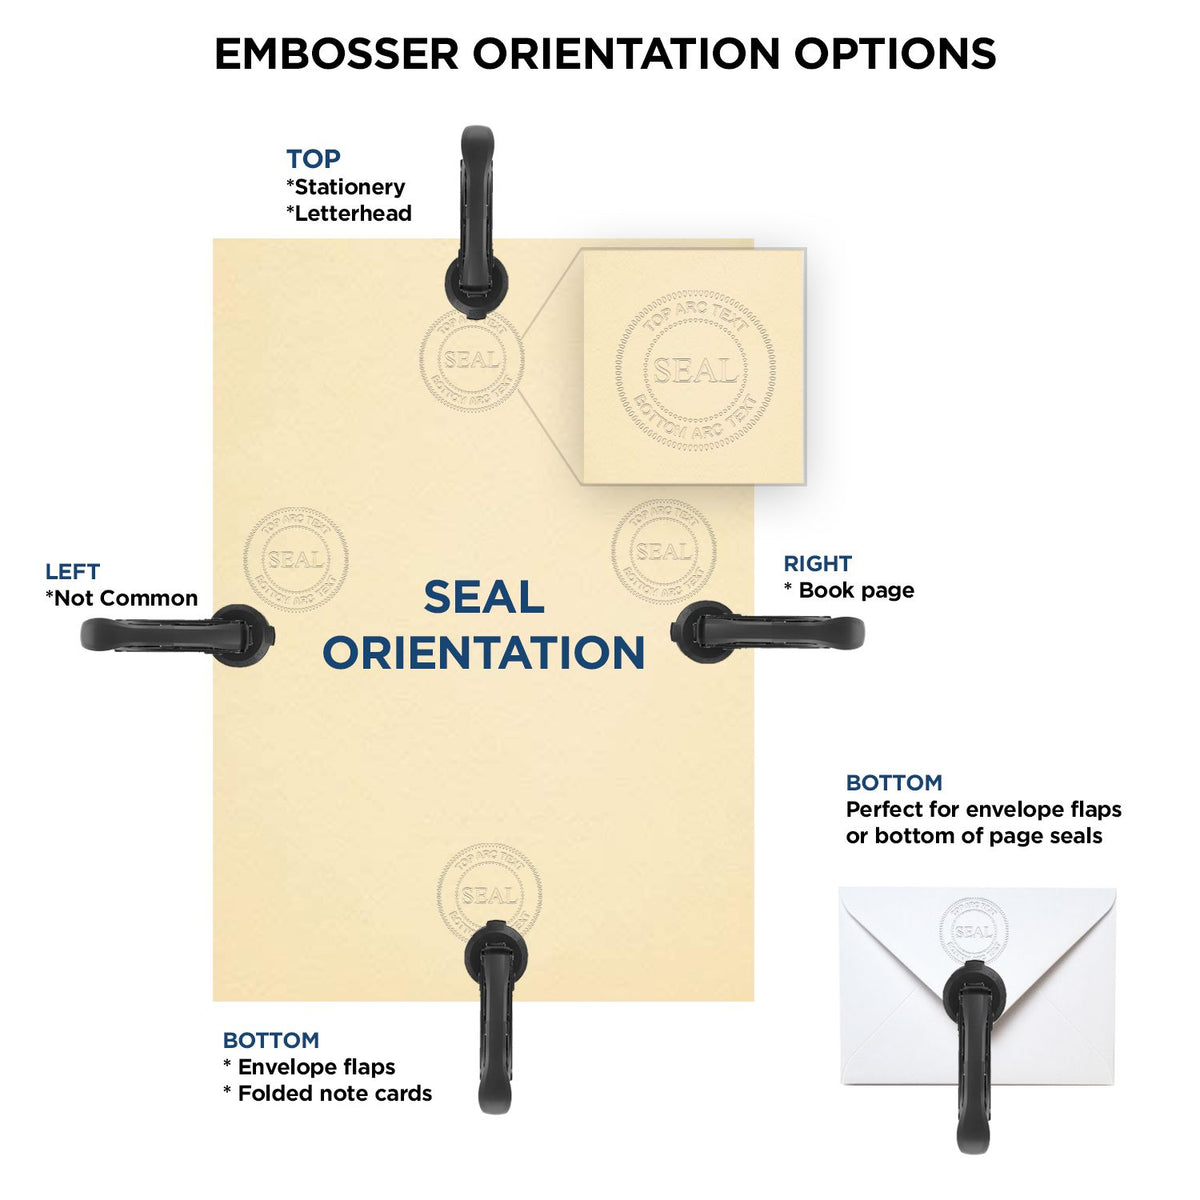 An infographic for the Gift Louisiana Landscape Architect Seal showing embosser orientation, this is showing examples of a top, bottom, right and left insert.